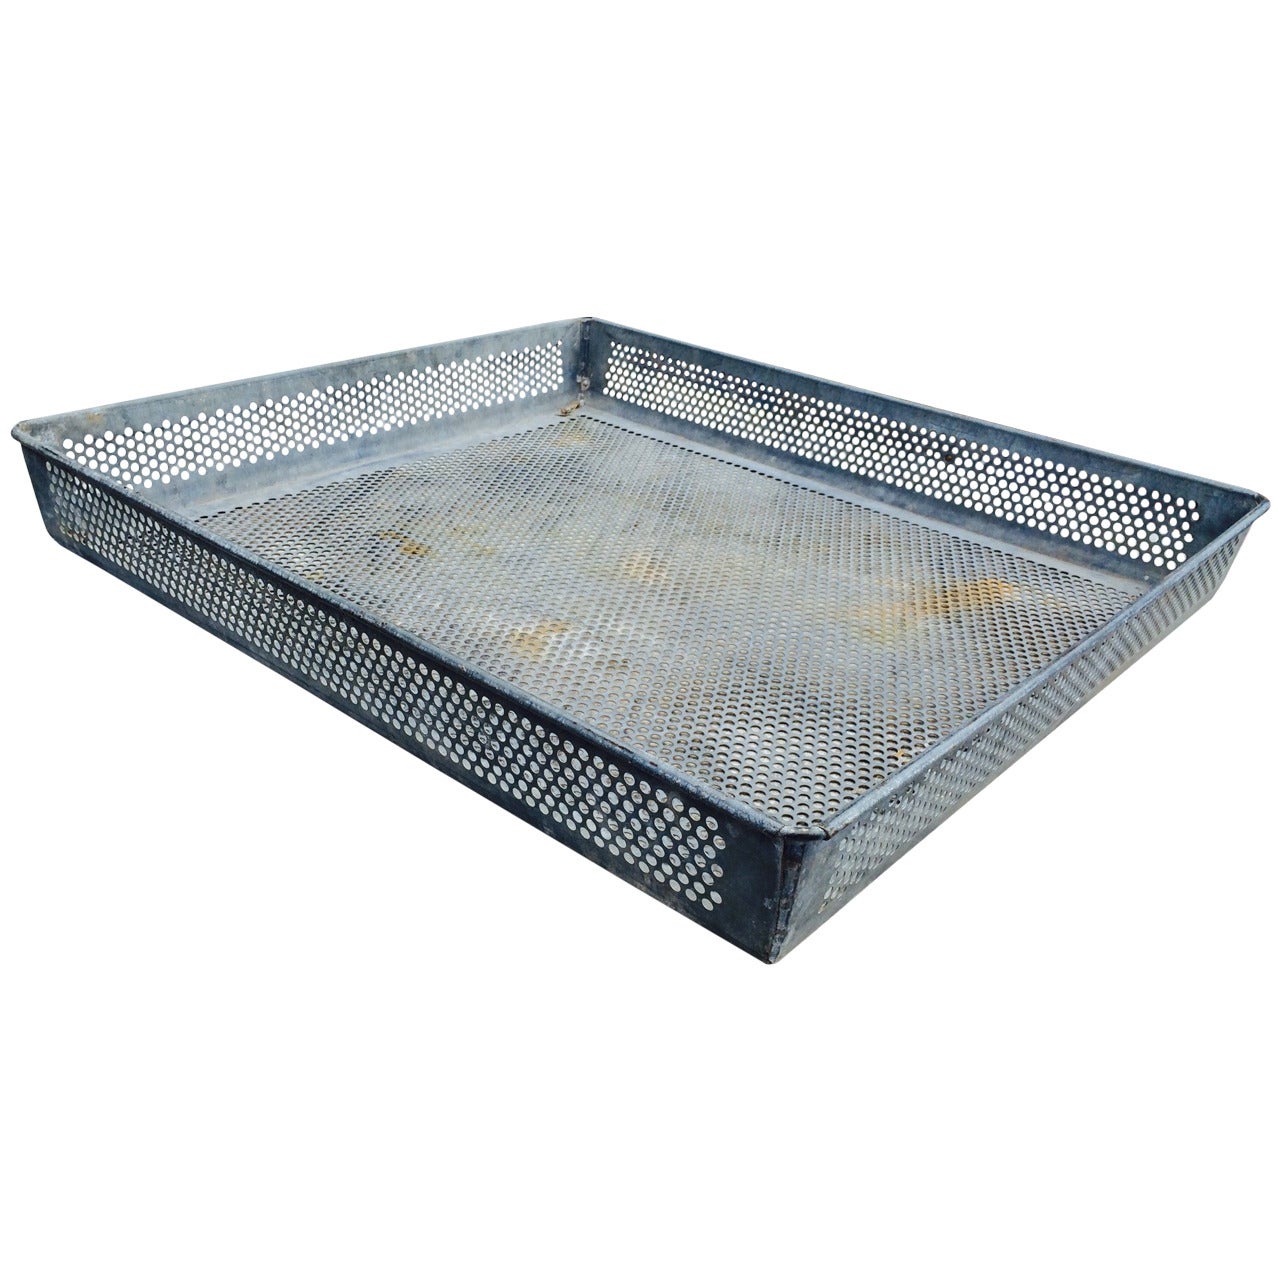 Industrial Galvanized Steel Perforated Sorting Bins; 3 available